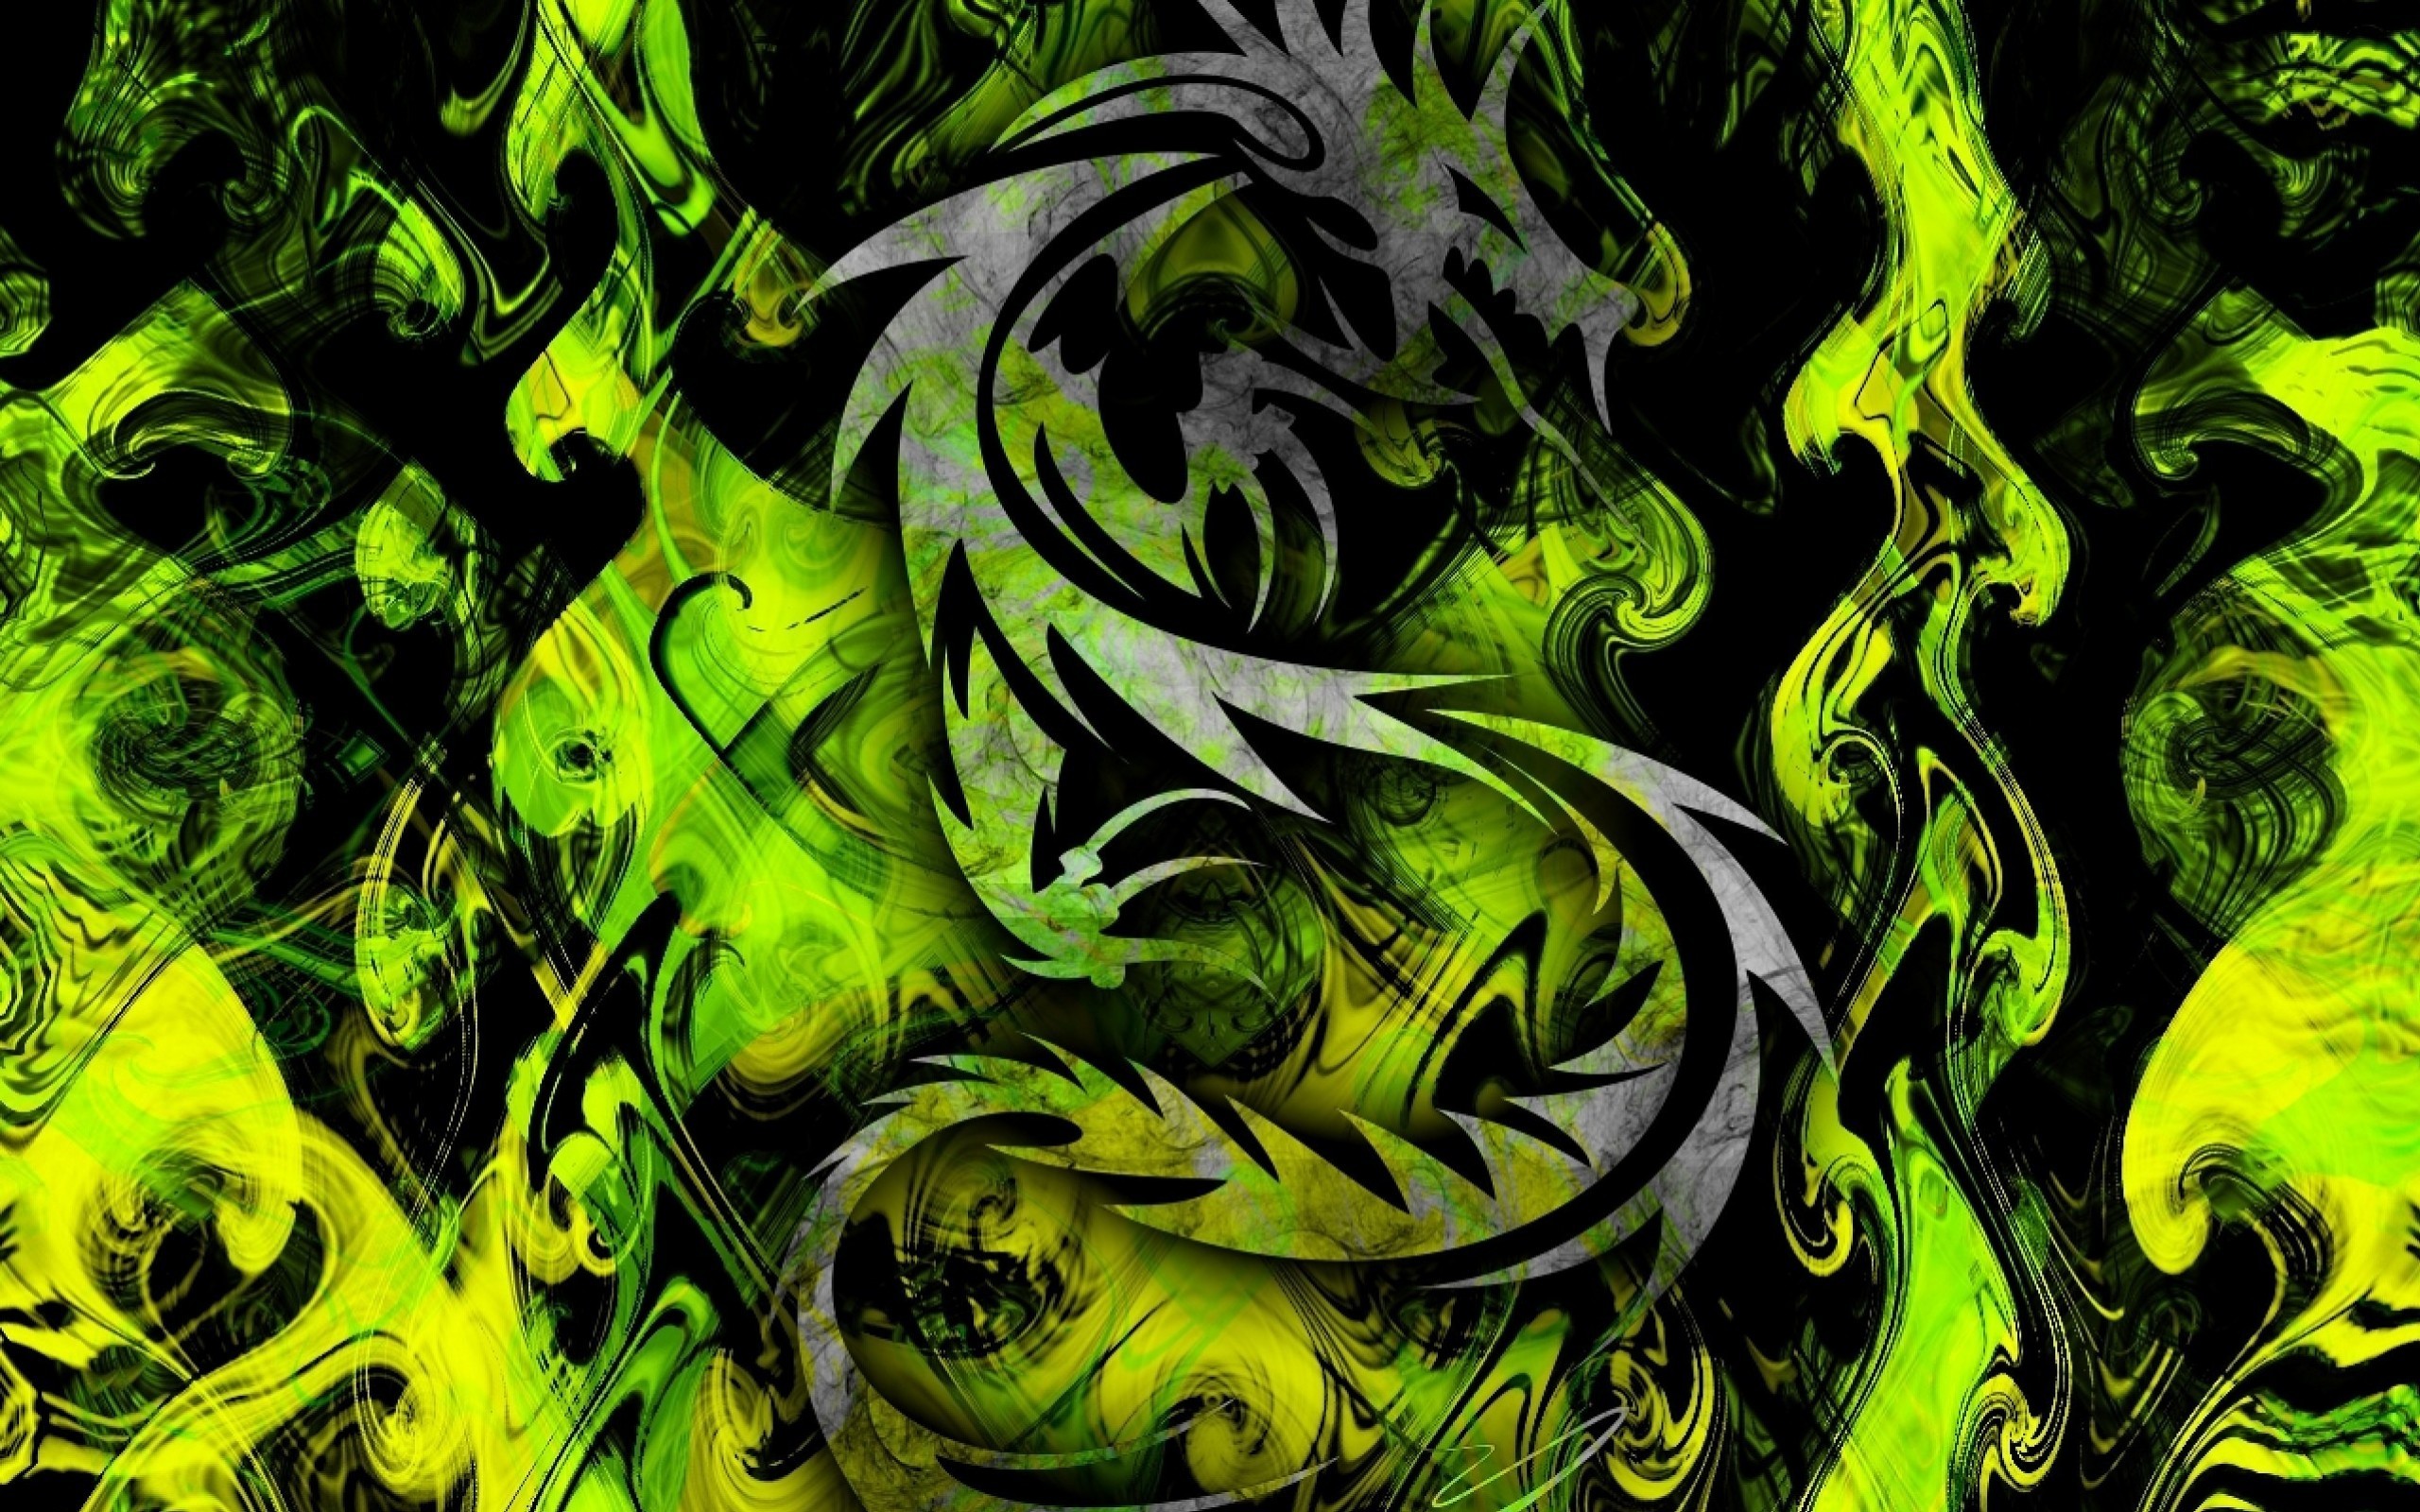 2560x1600 Green Tribal Design | Cool Designs And Backgrounds | Pinterest Green and  Black Abstract Wallpaper - WallpaperSafari ...